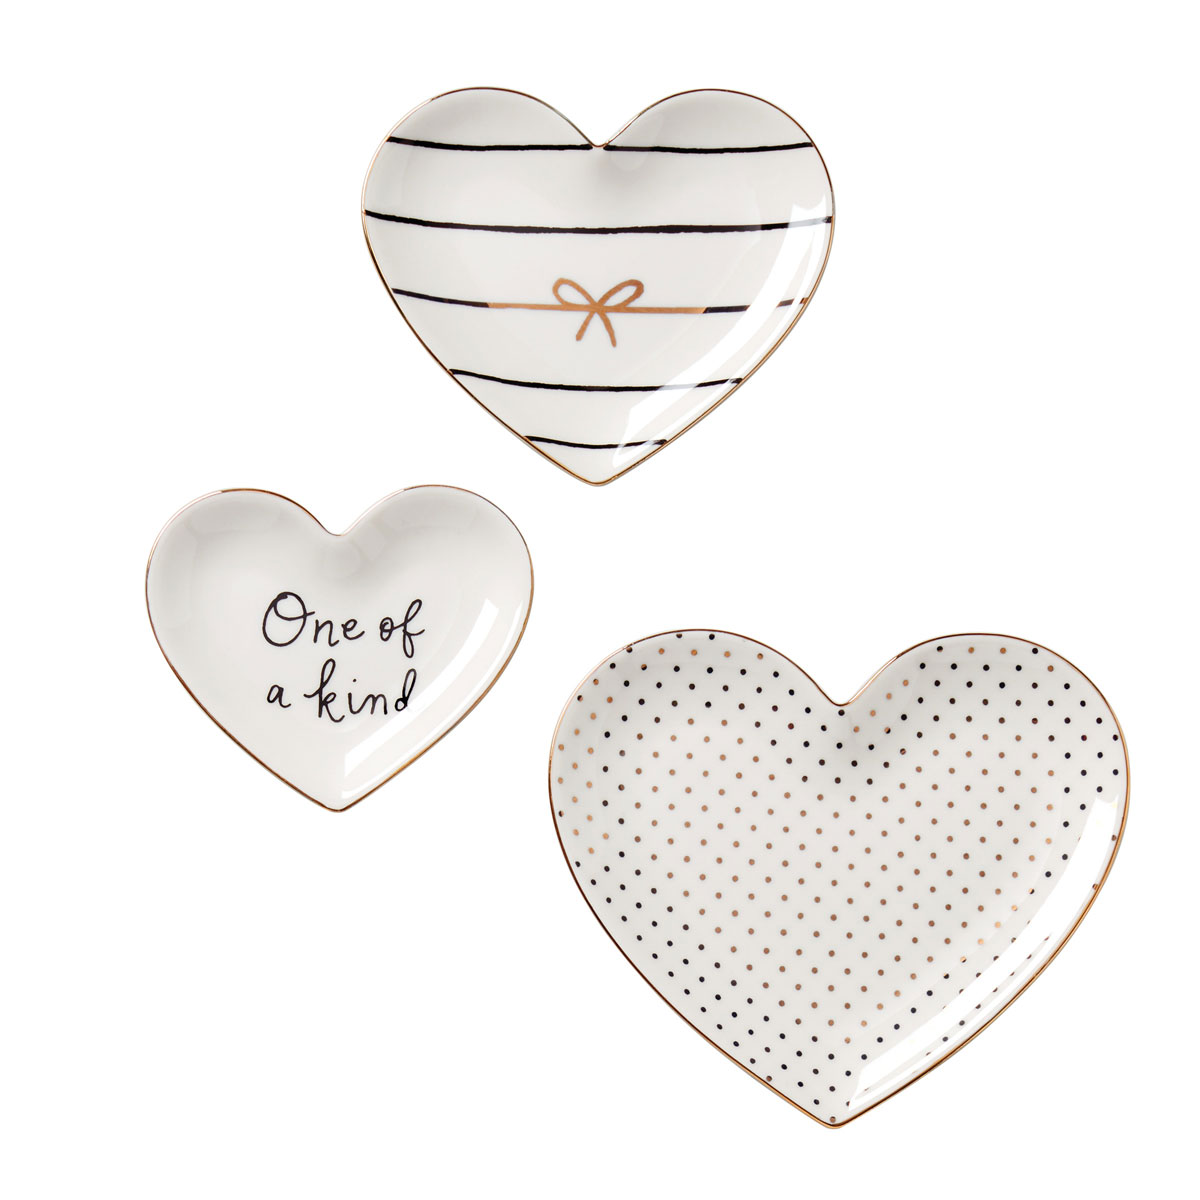 Kate Spade New York, Lenox Charmed Life Heart Catch All, Set of 3